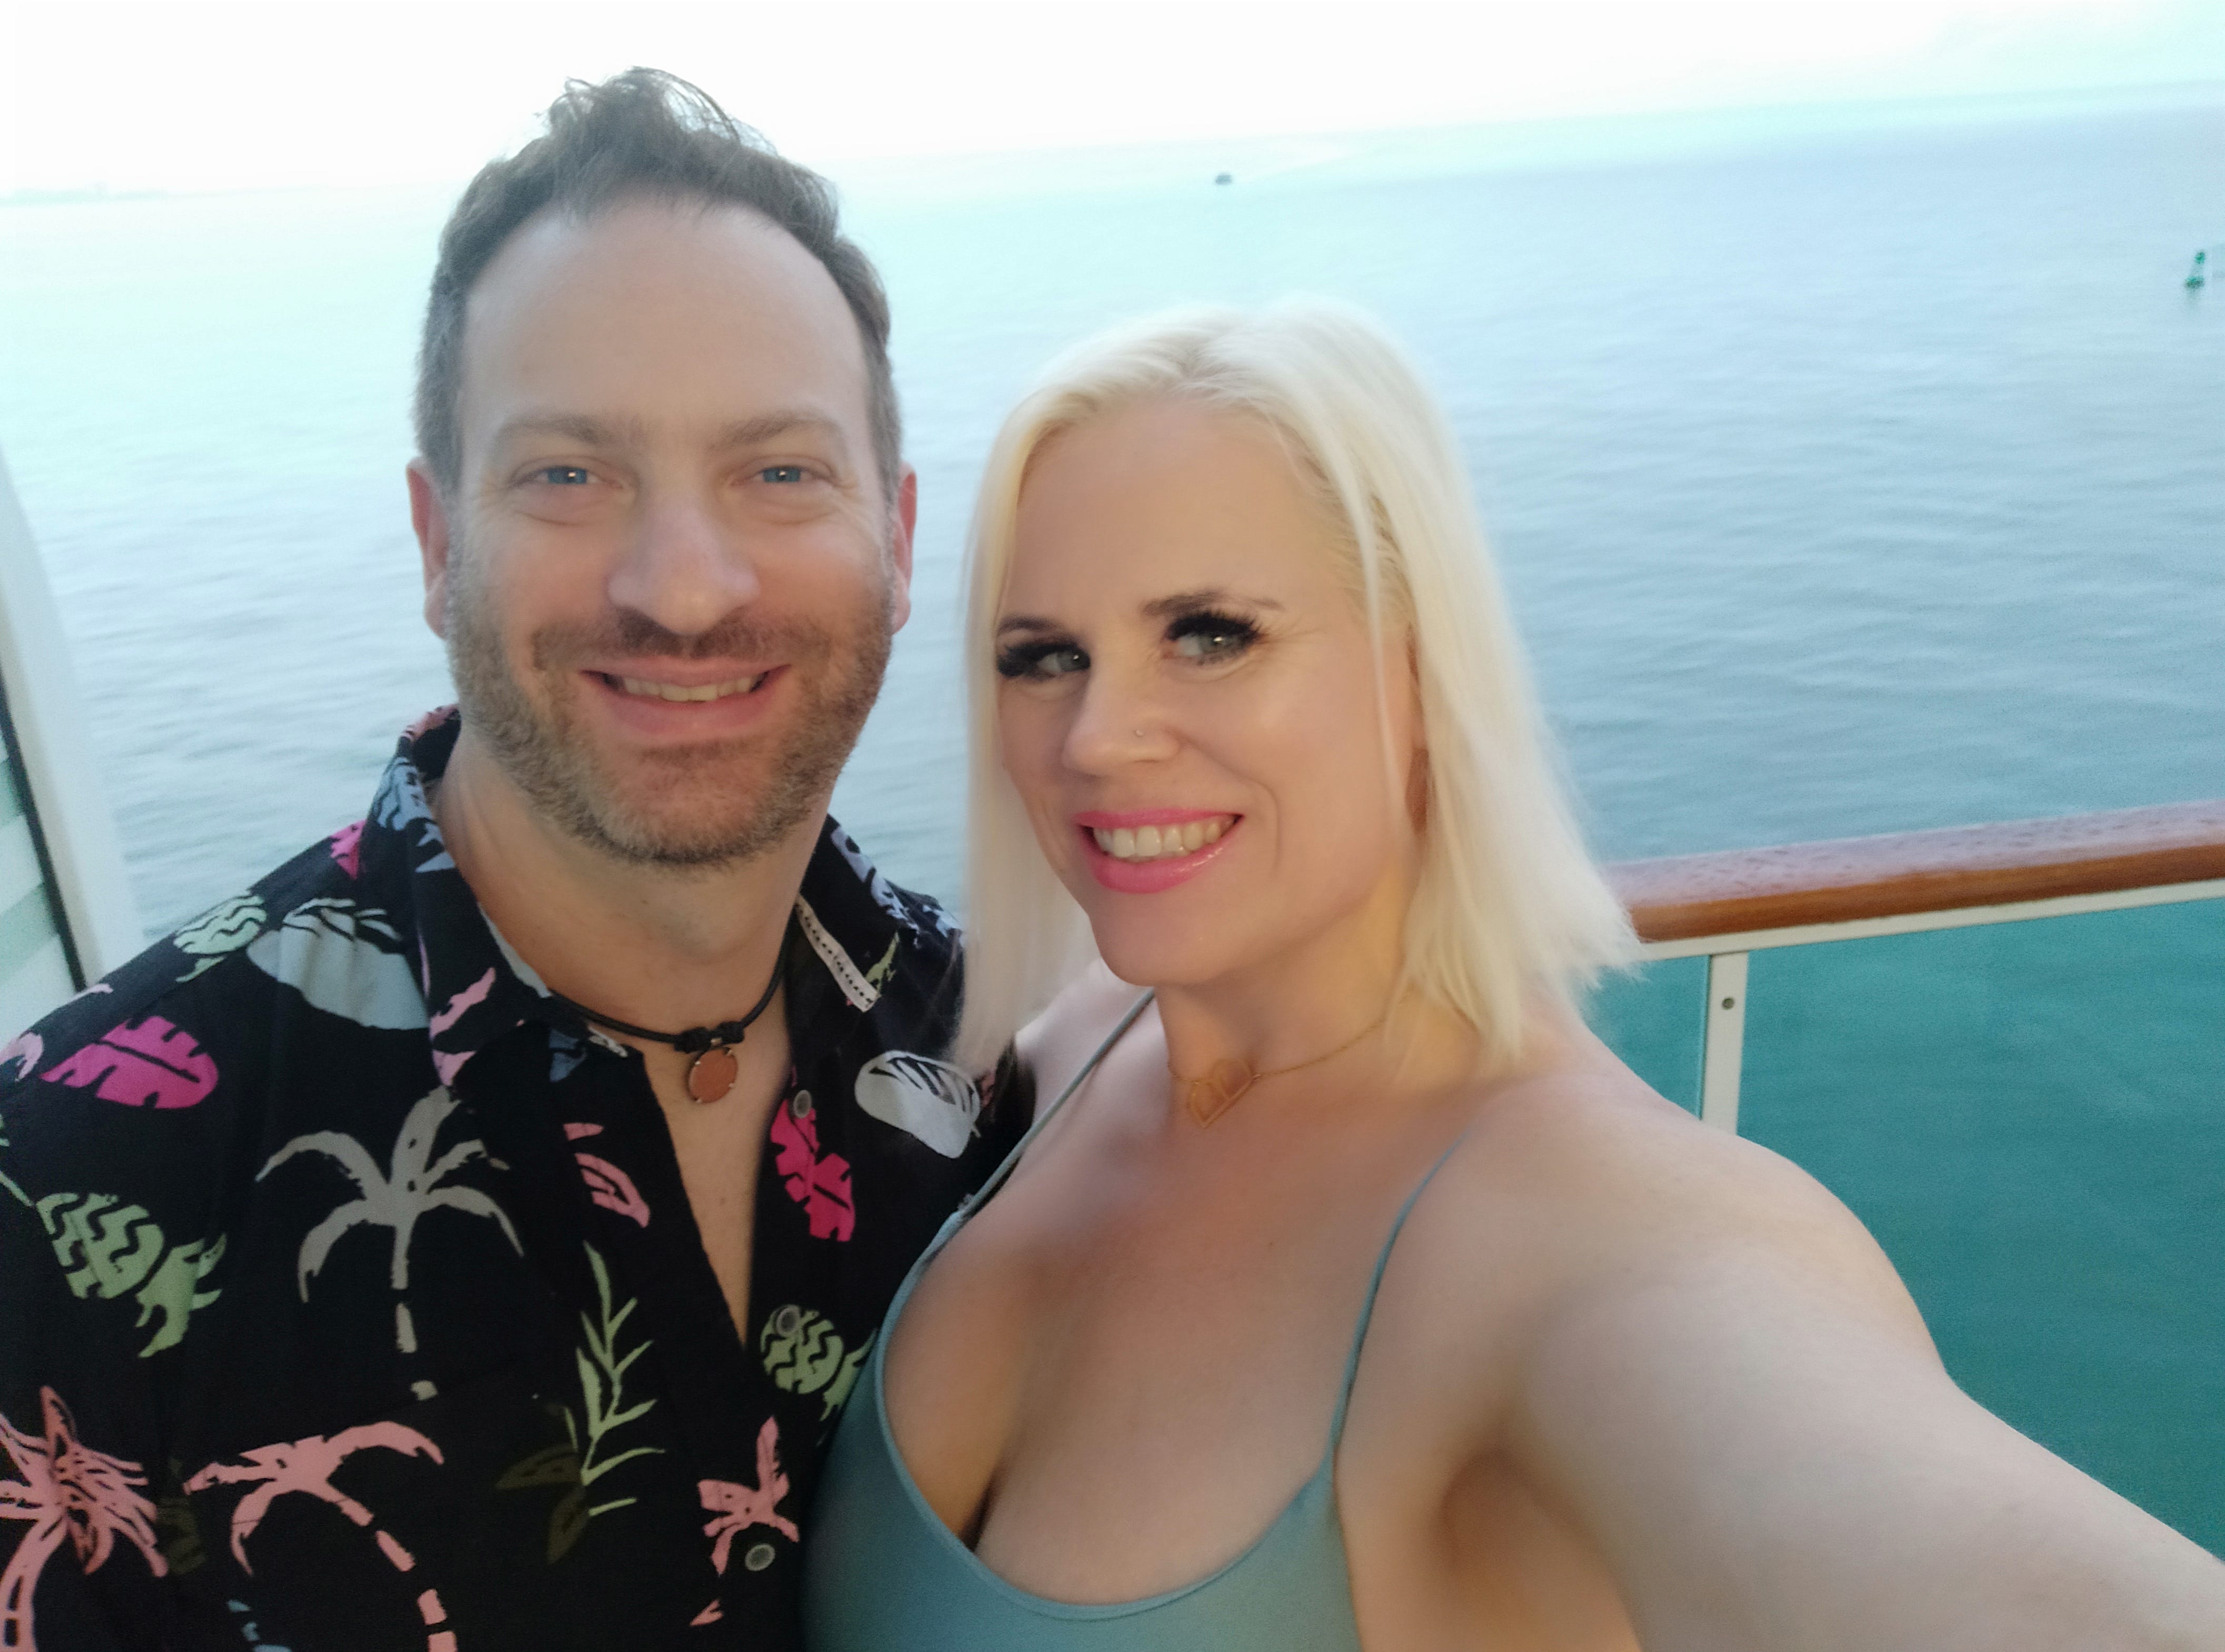 Cruises are a popular place for swingers to lower their inhibitions